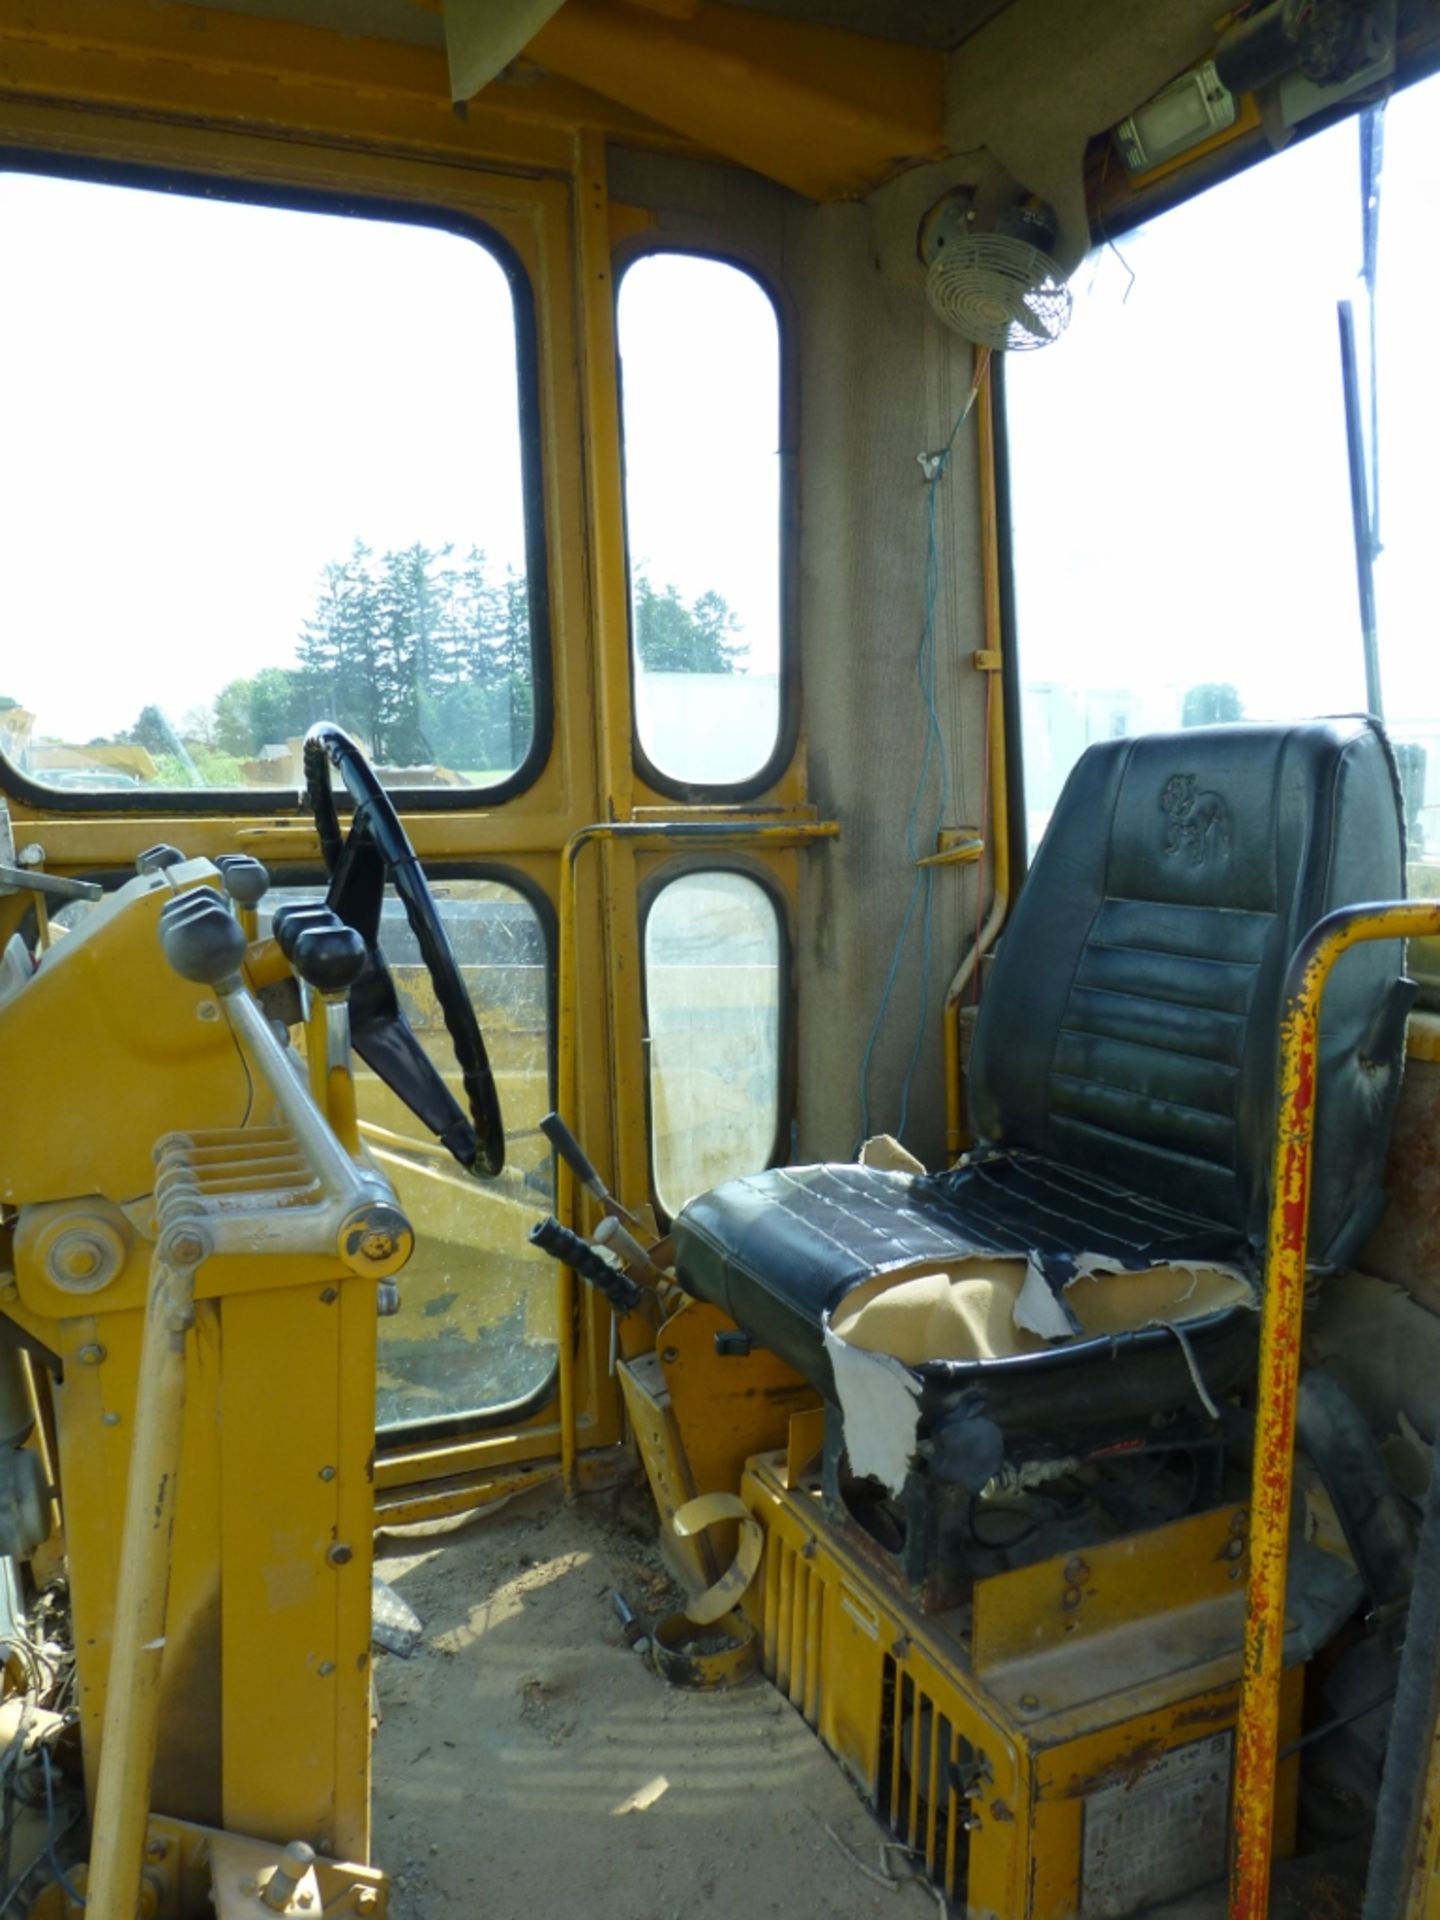 Caterpillar 120G motor grader with 13'10" moldboard se:87v871. Power shift. 7720 unverified hrs. - Image 12 of 27